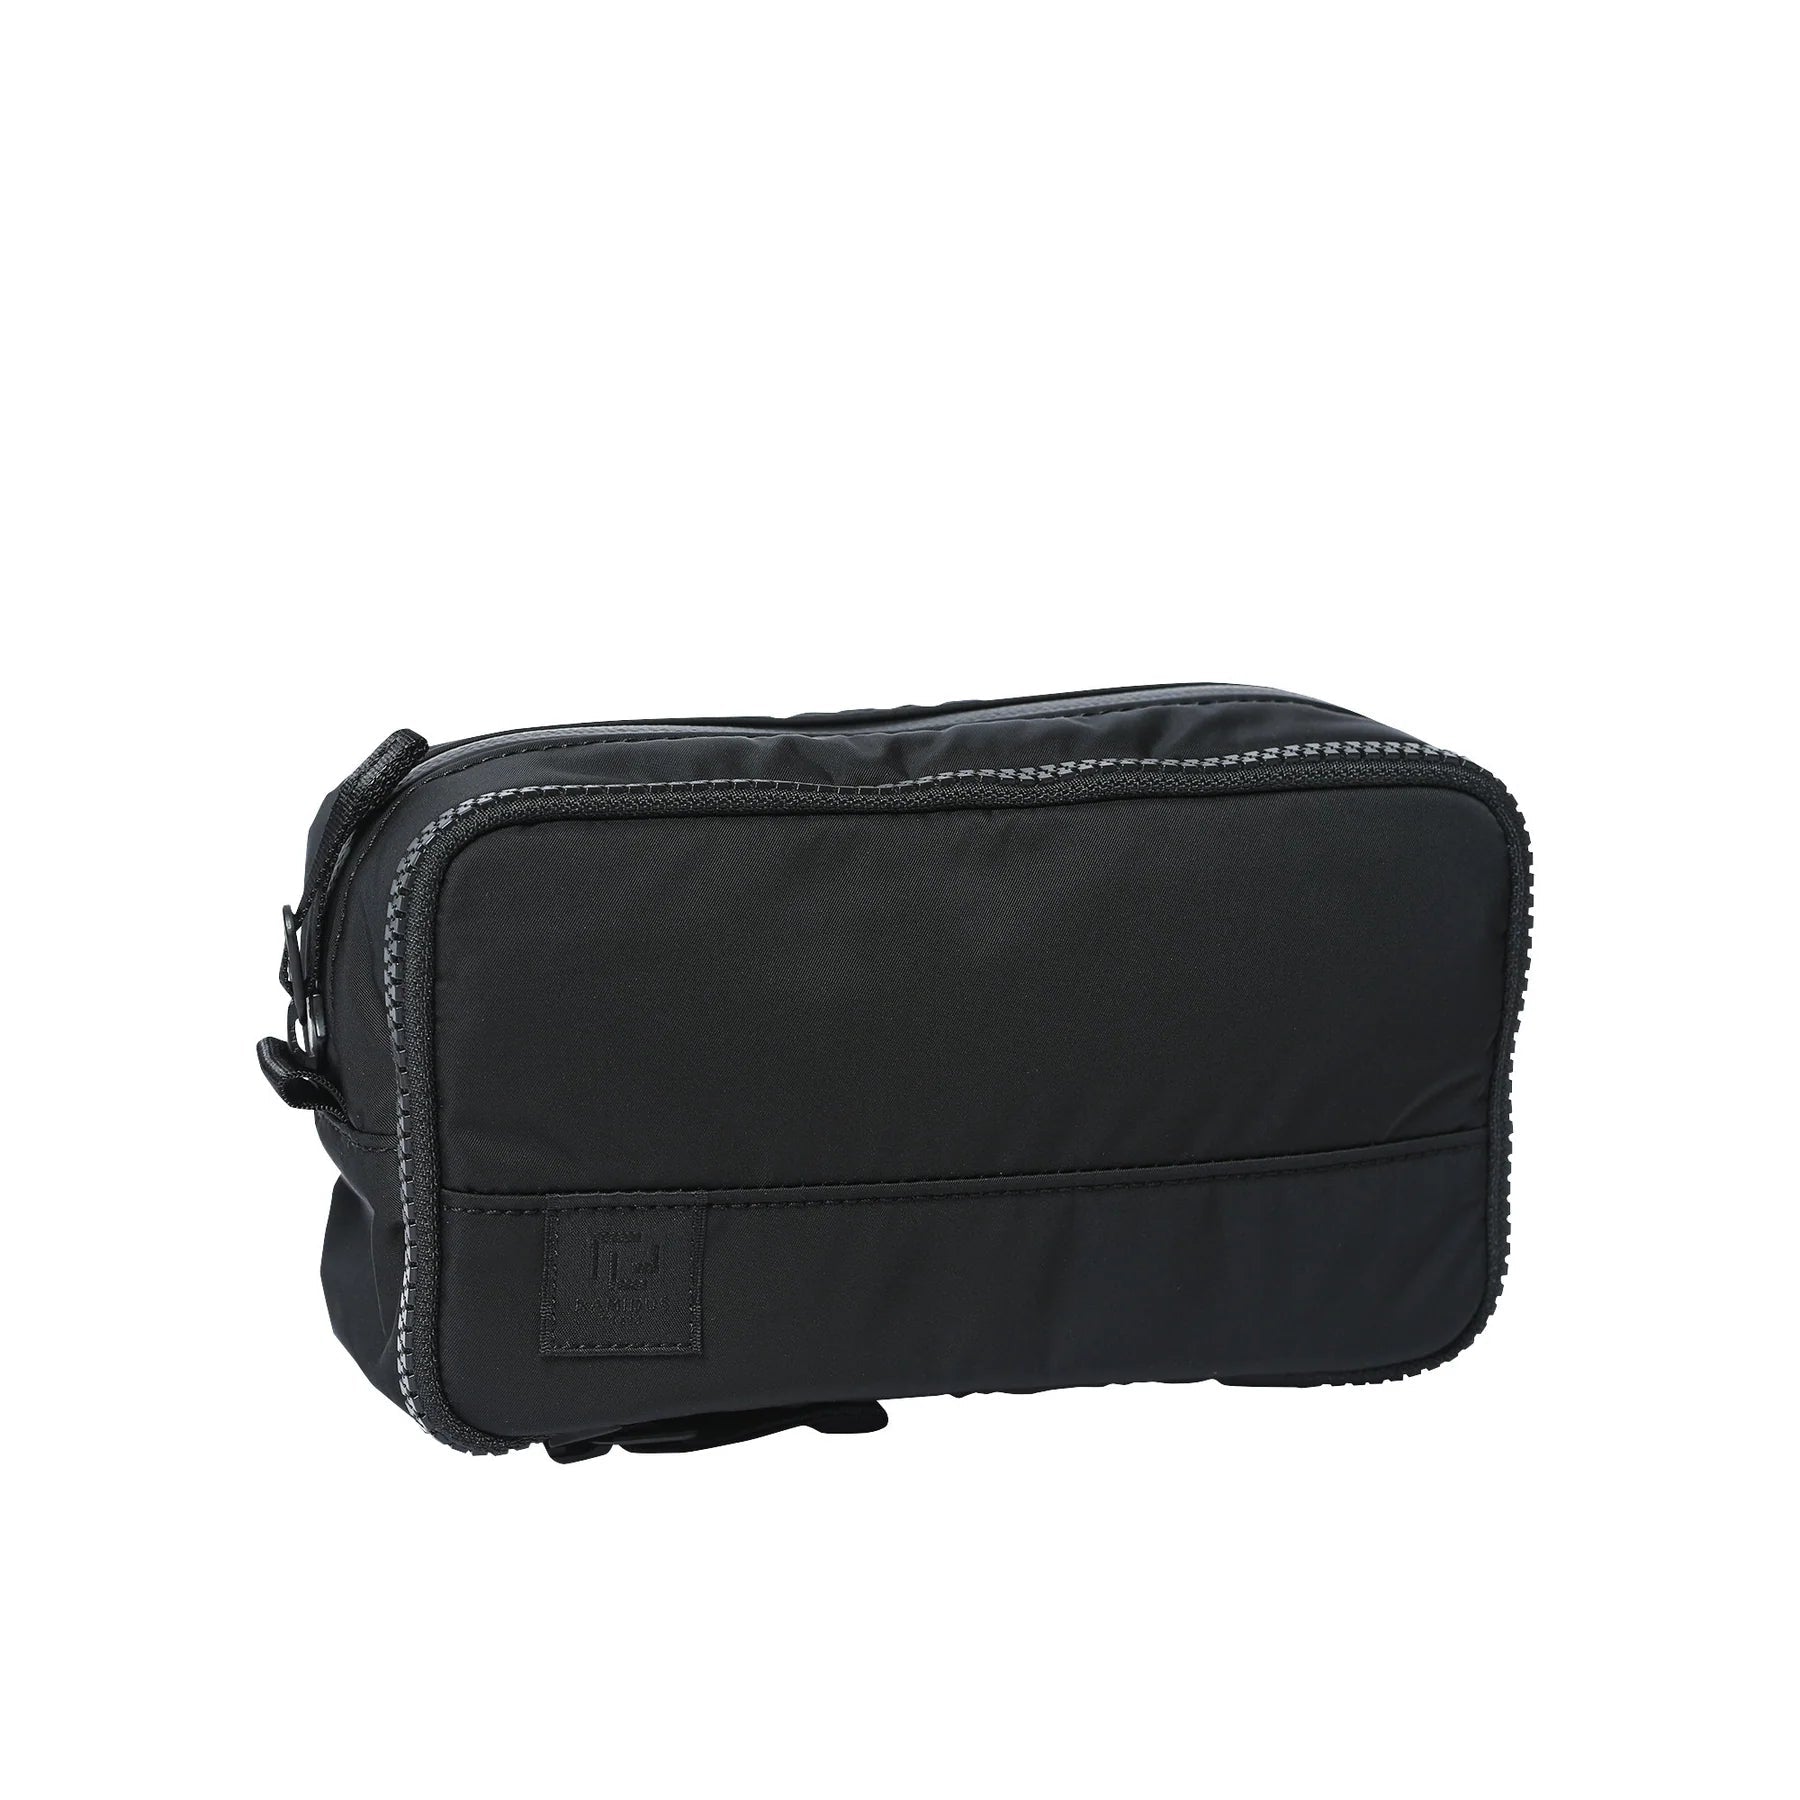 RAMIDUS / “BLACK BEAUTY” GROOMING POUCH